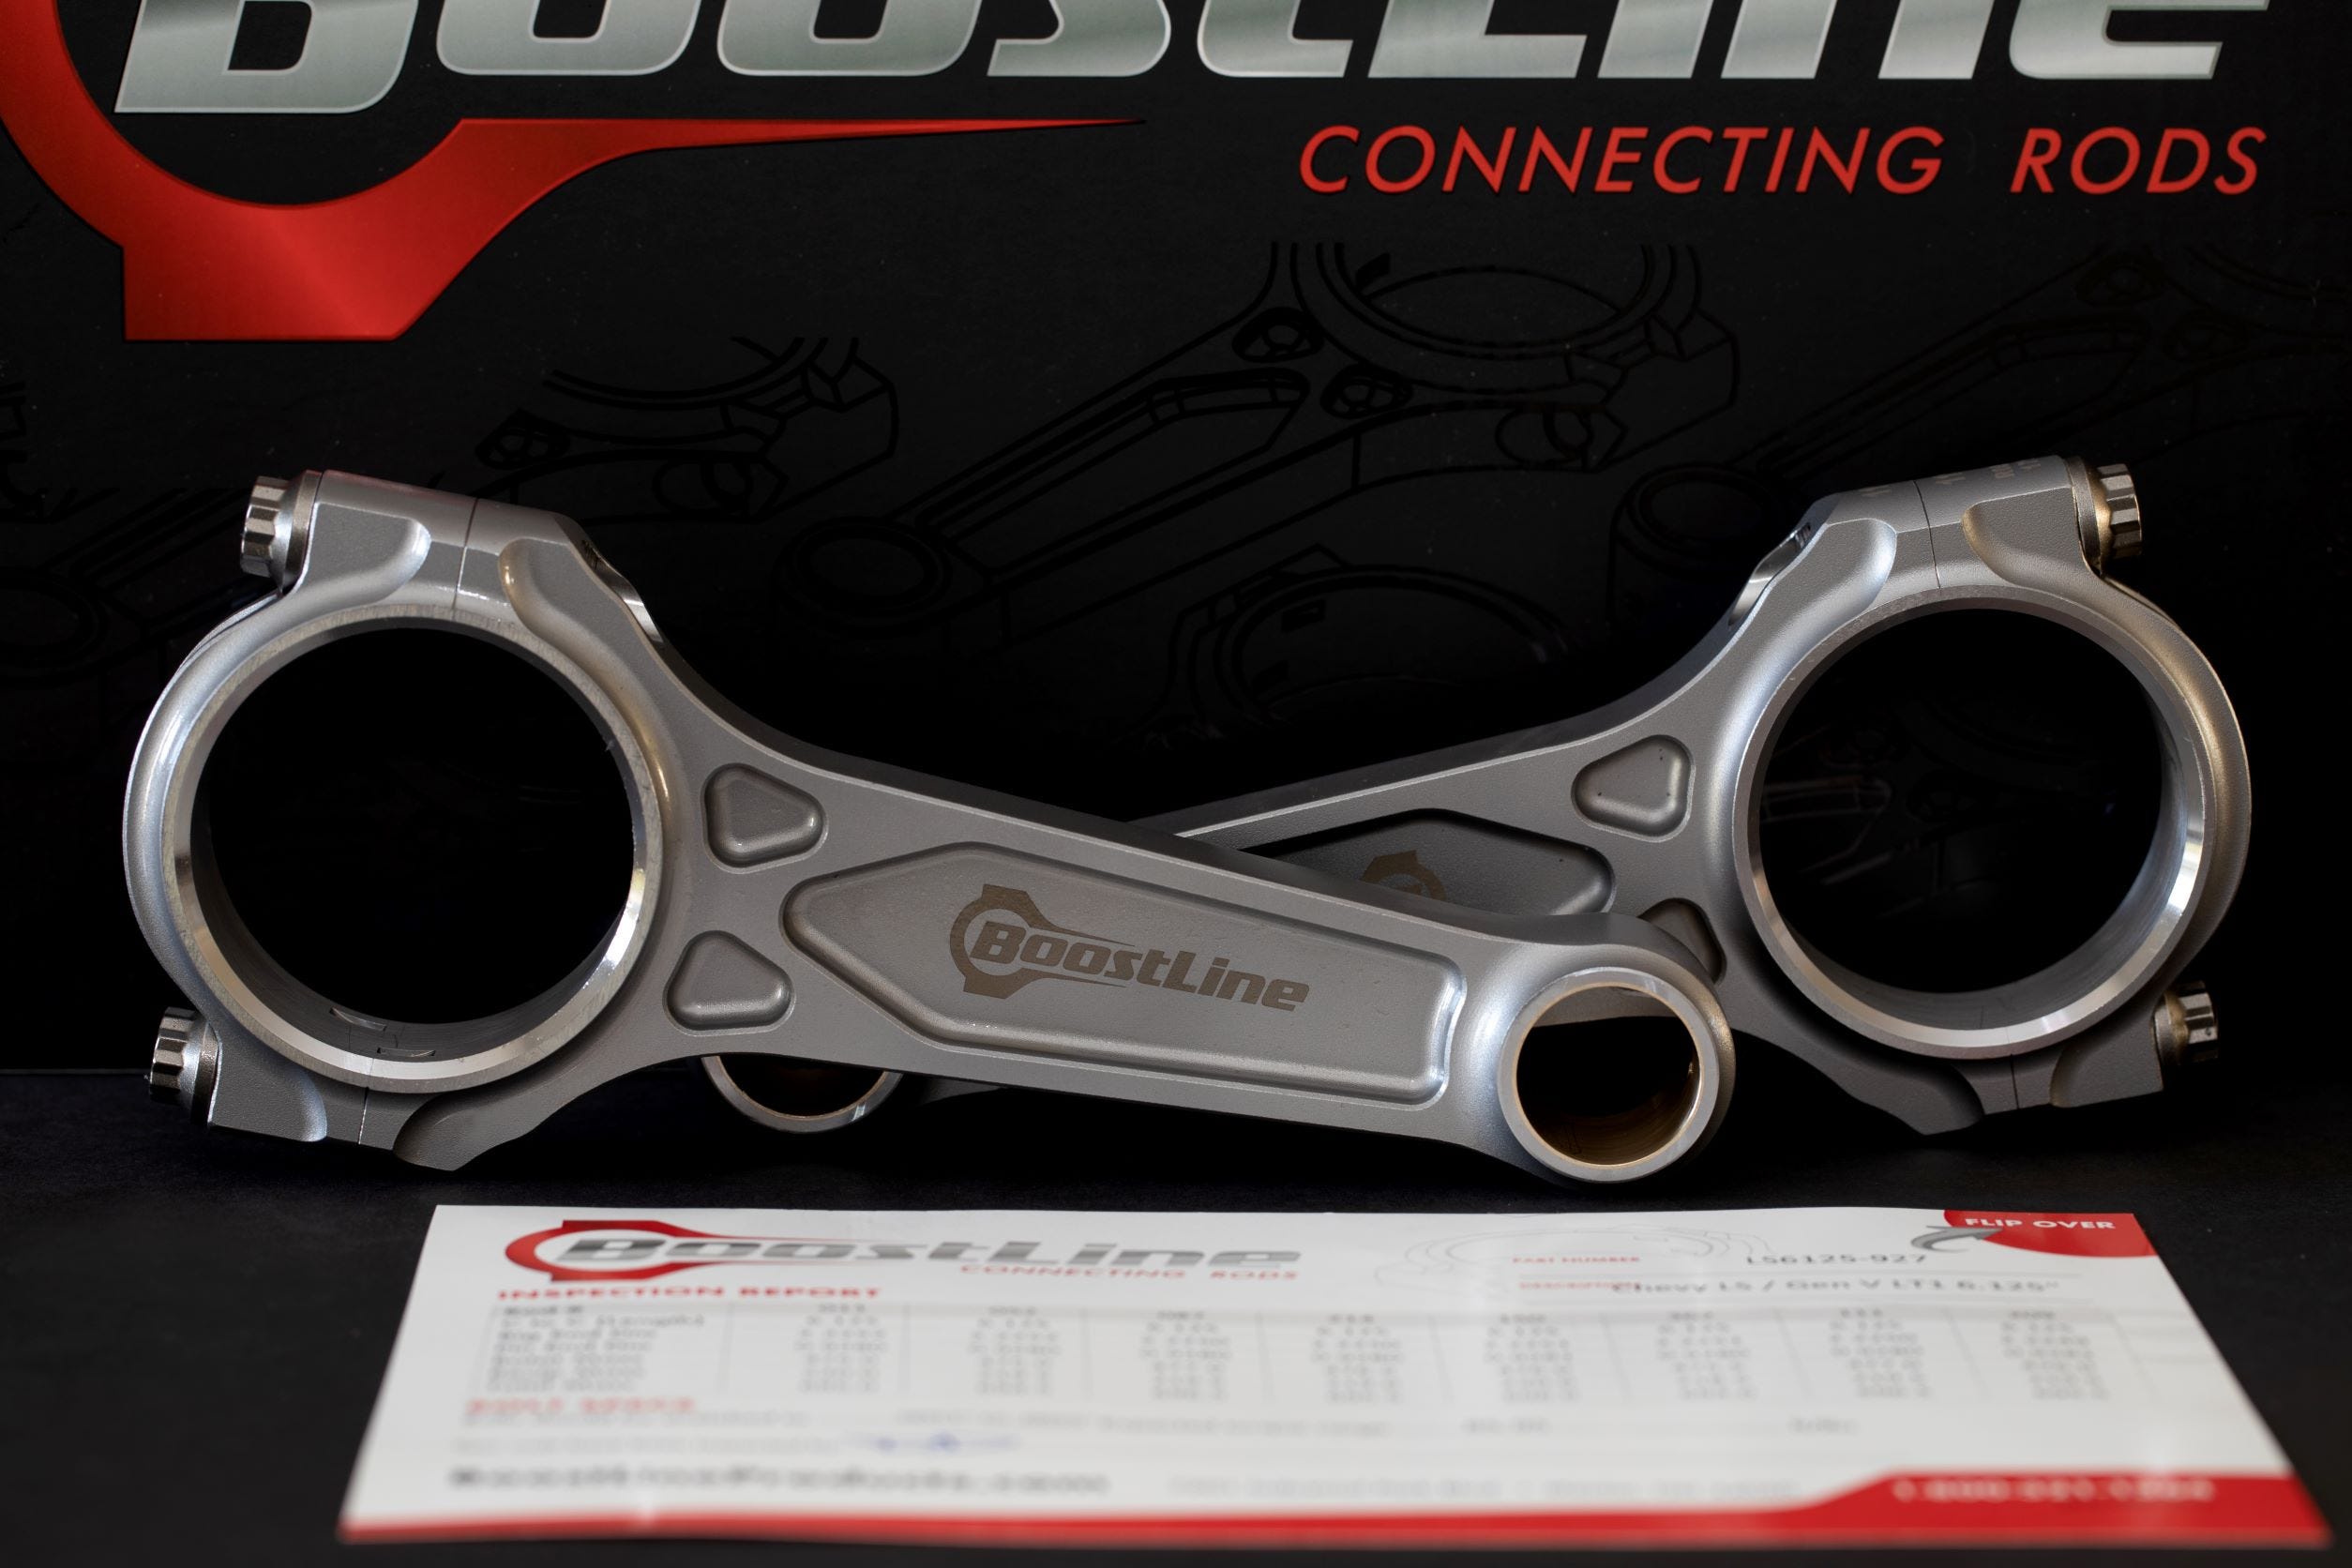 BoostLine connecting rods expanded applications